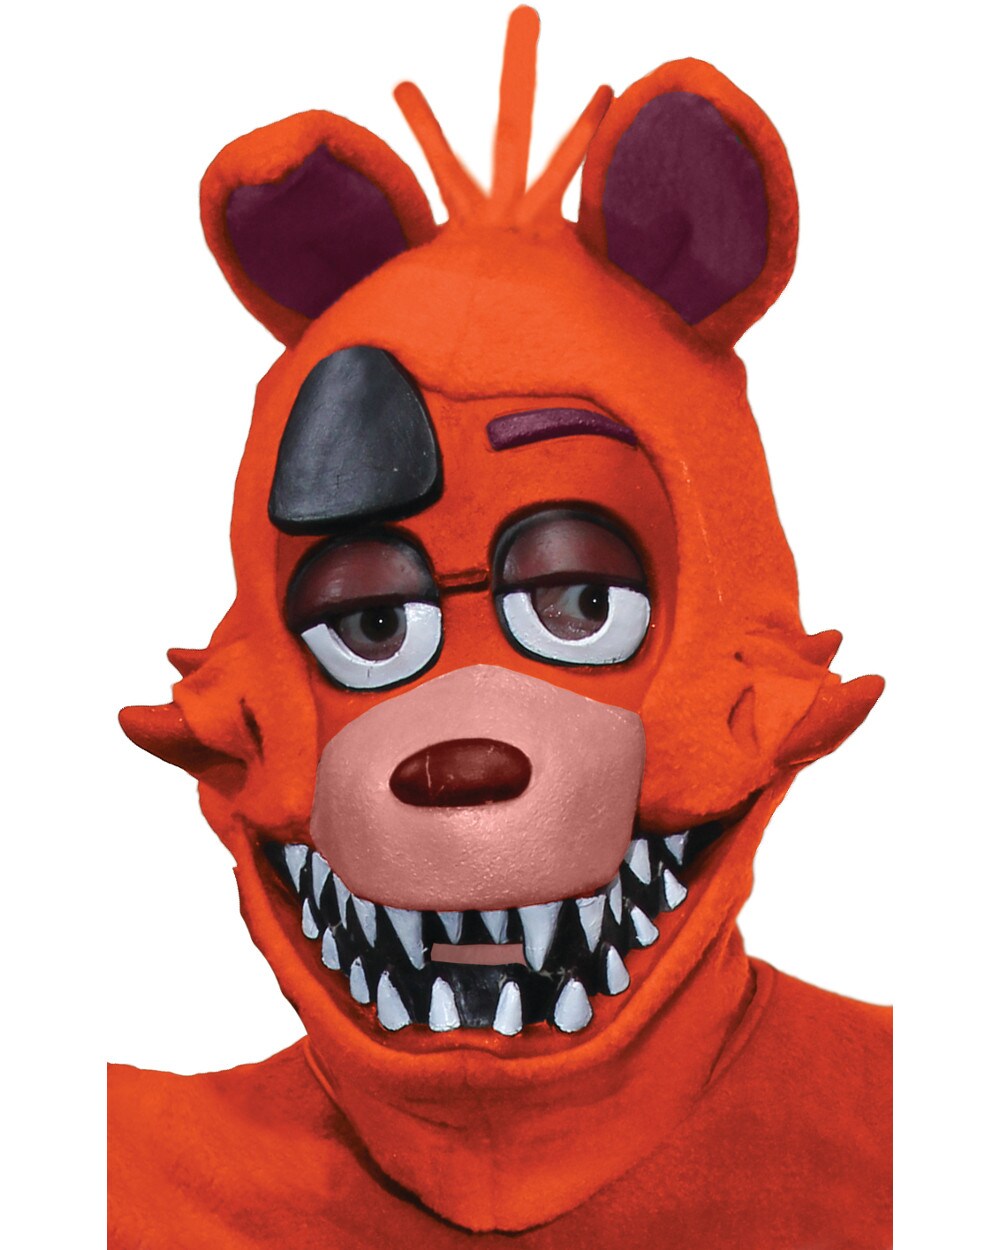 Withered Foxy ( FIVE NIGHTS AT FREDDY'S / FNAF )